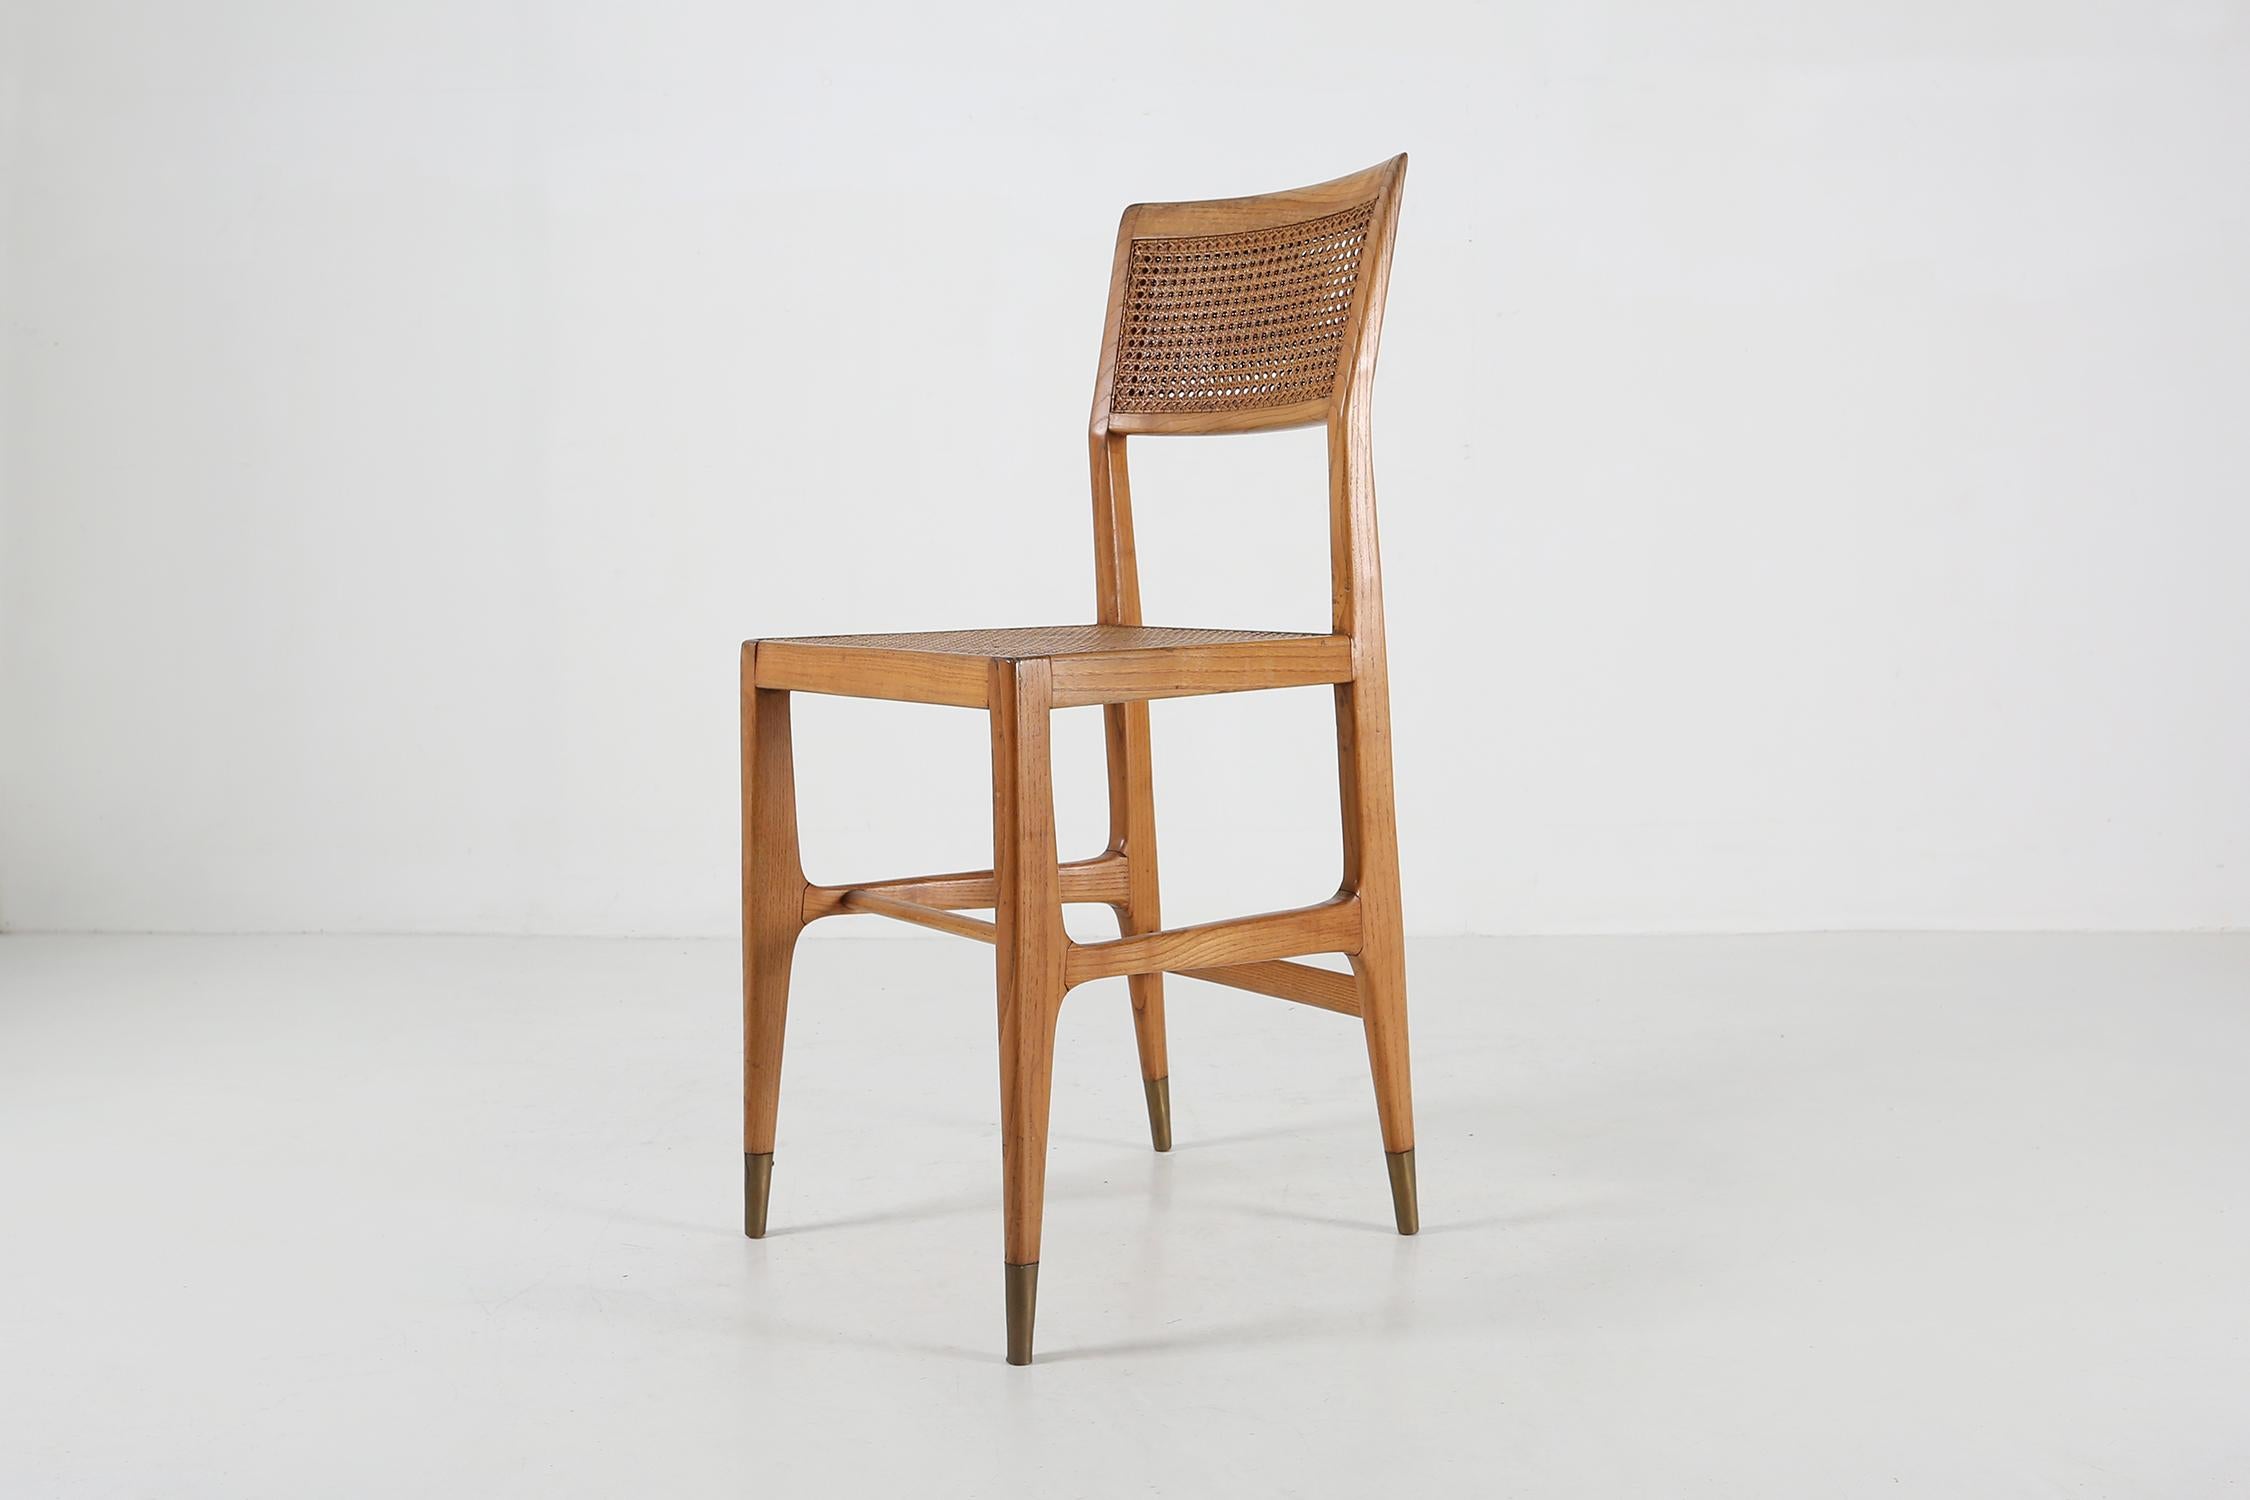 Cane Gio Ponti Chairs for the Casino San Remo For Sale